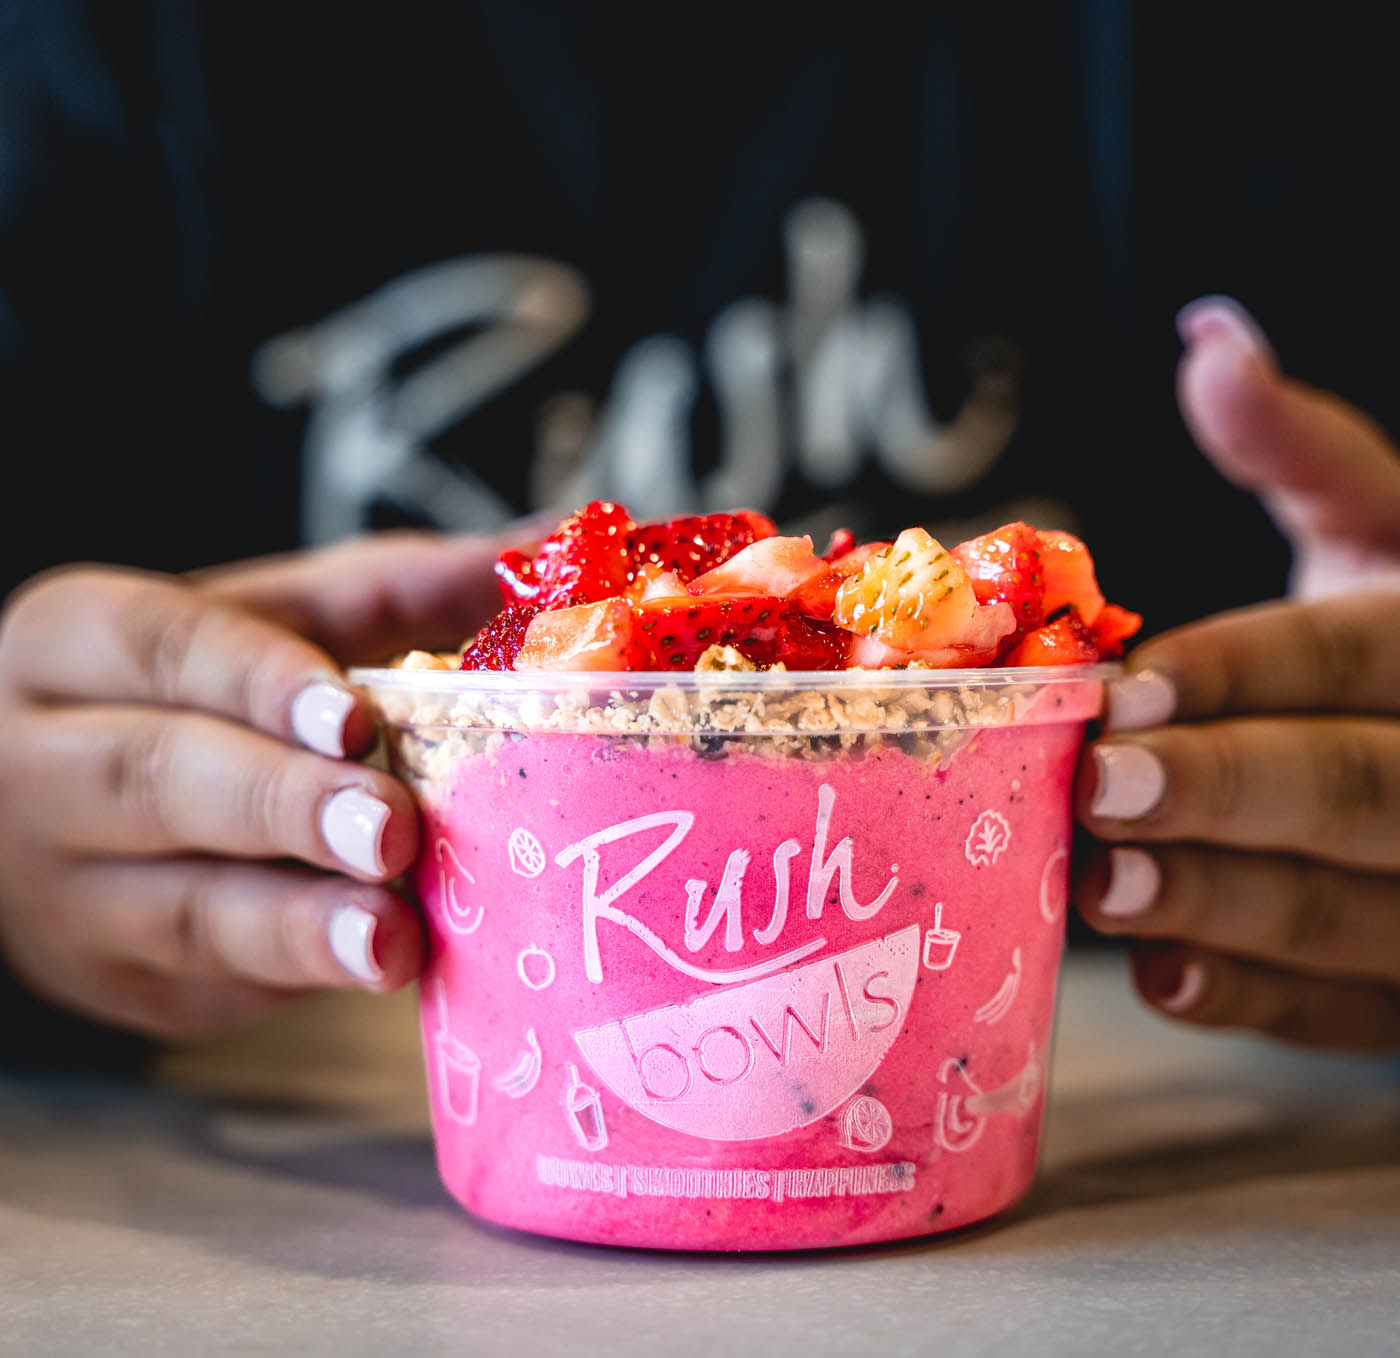 A girl enjoying a Rush Bowls - enjoy yummy food and retirement security with Rush Bowls' franchise pros.